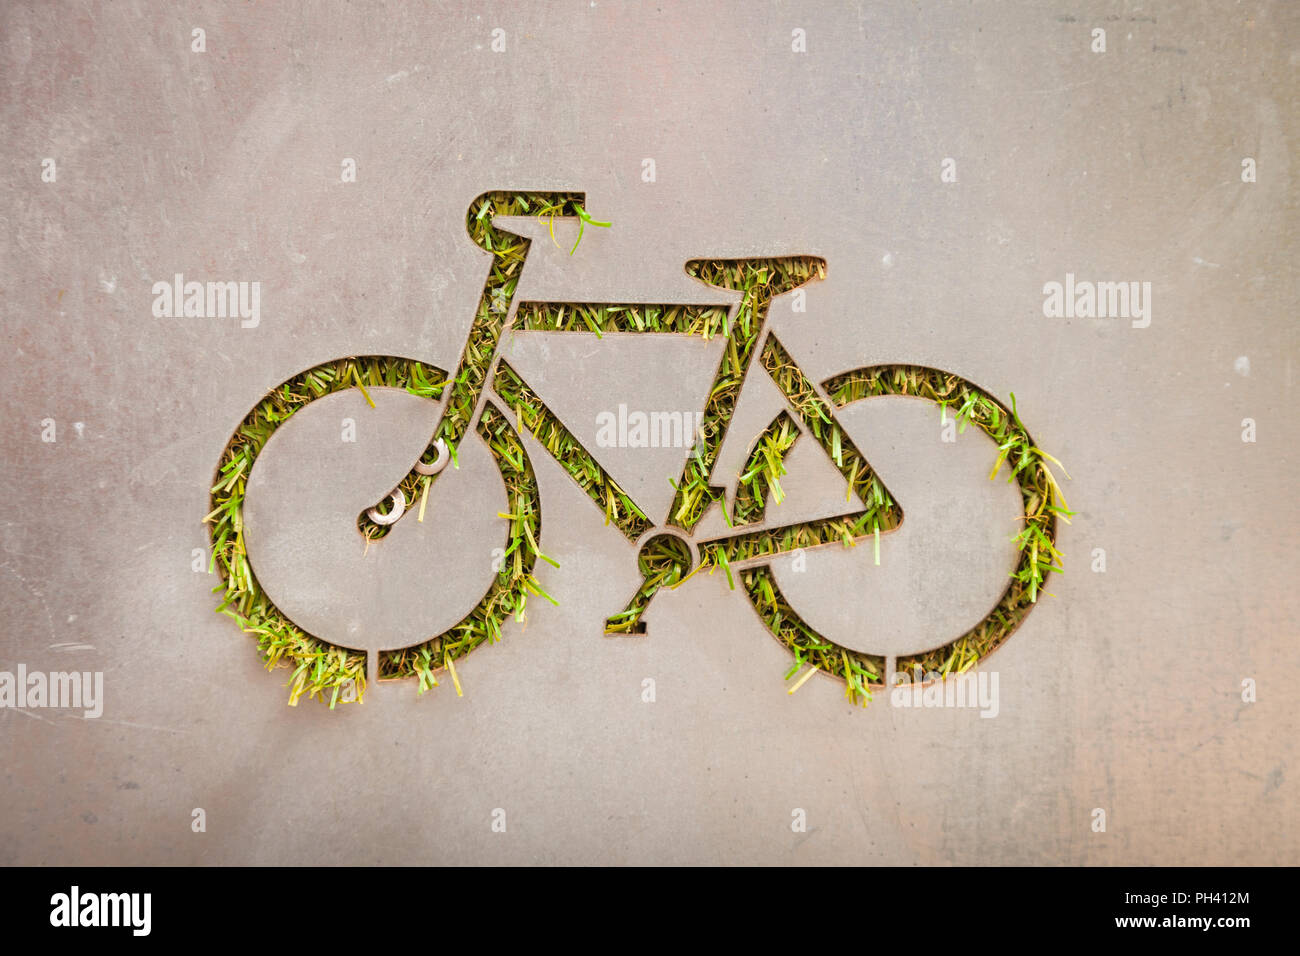 Symbolic bicycle cut out of metal with grass growing UK Stock Photo